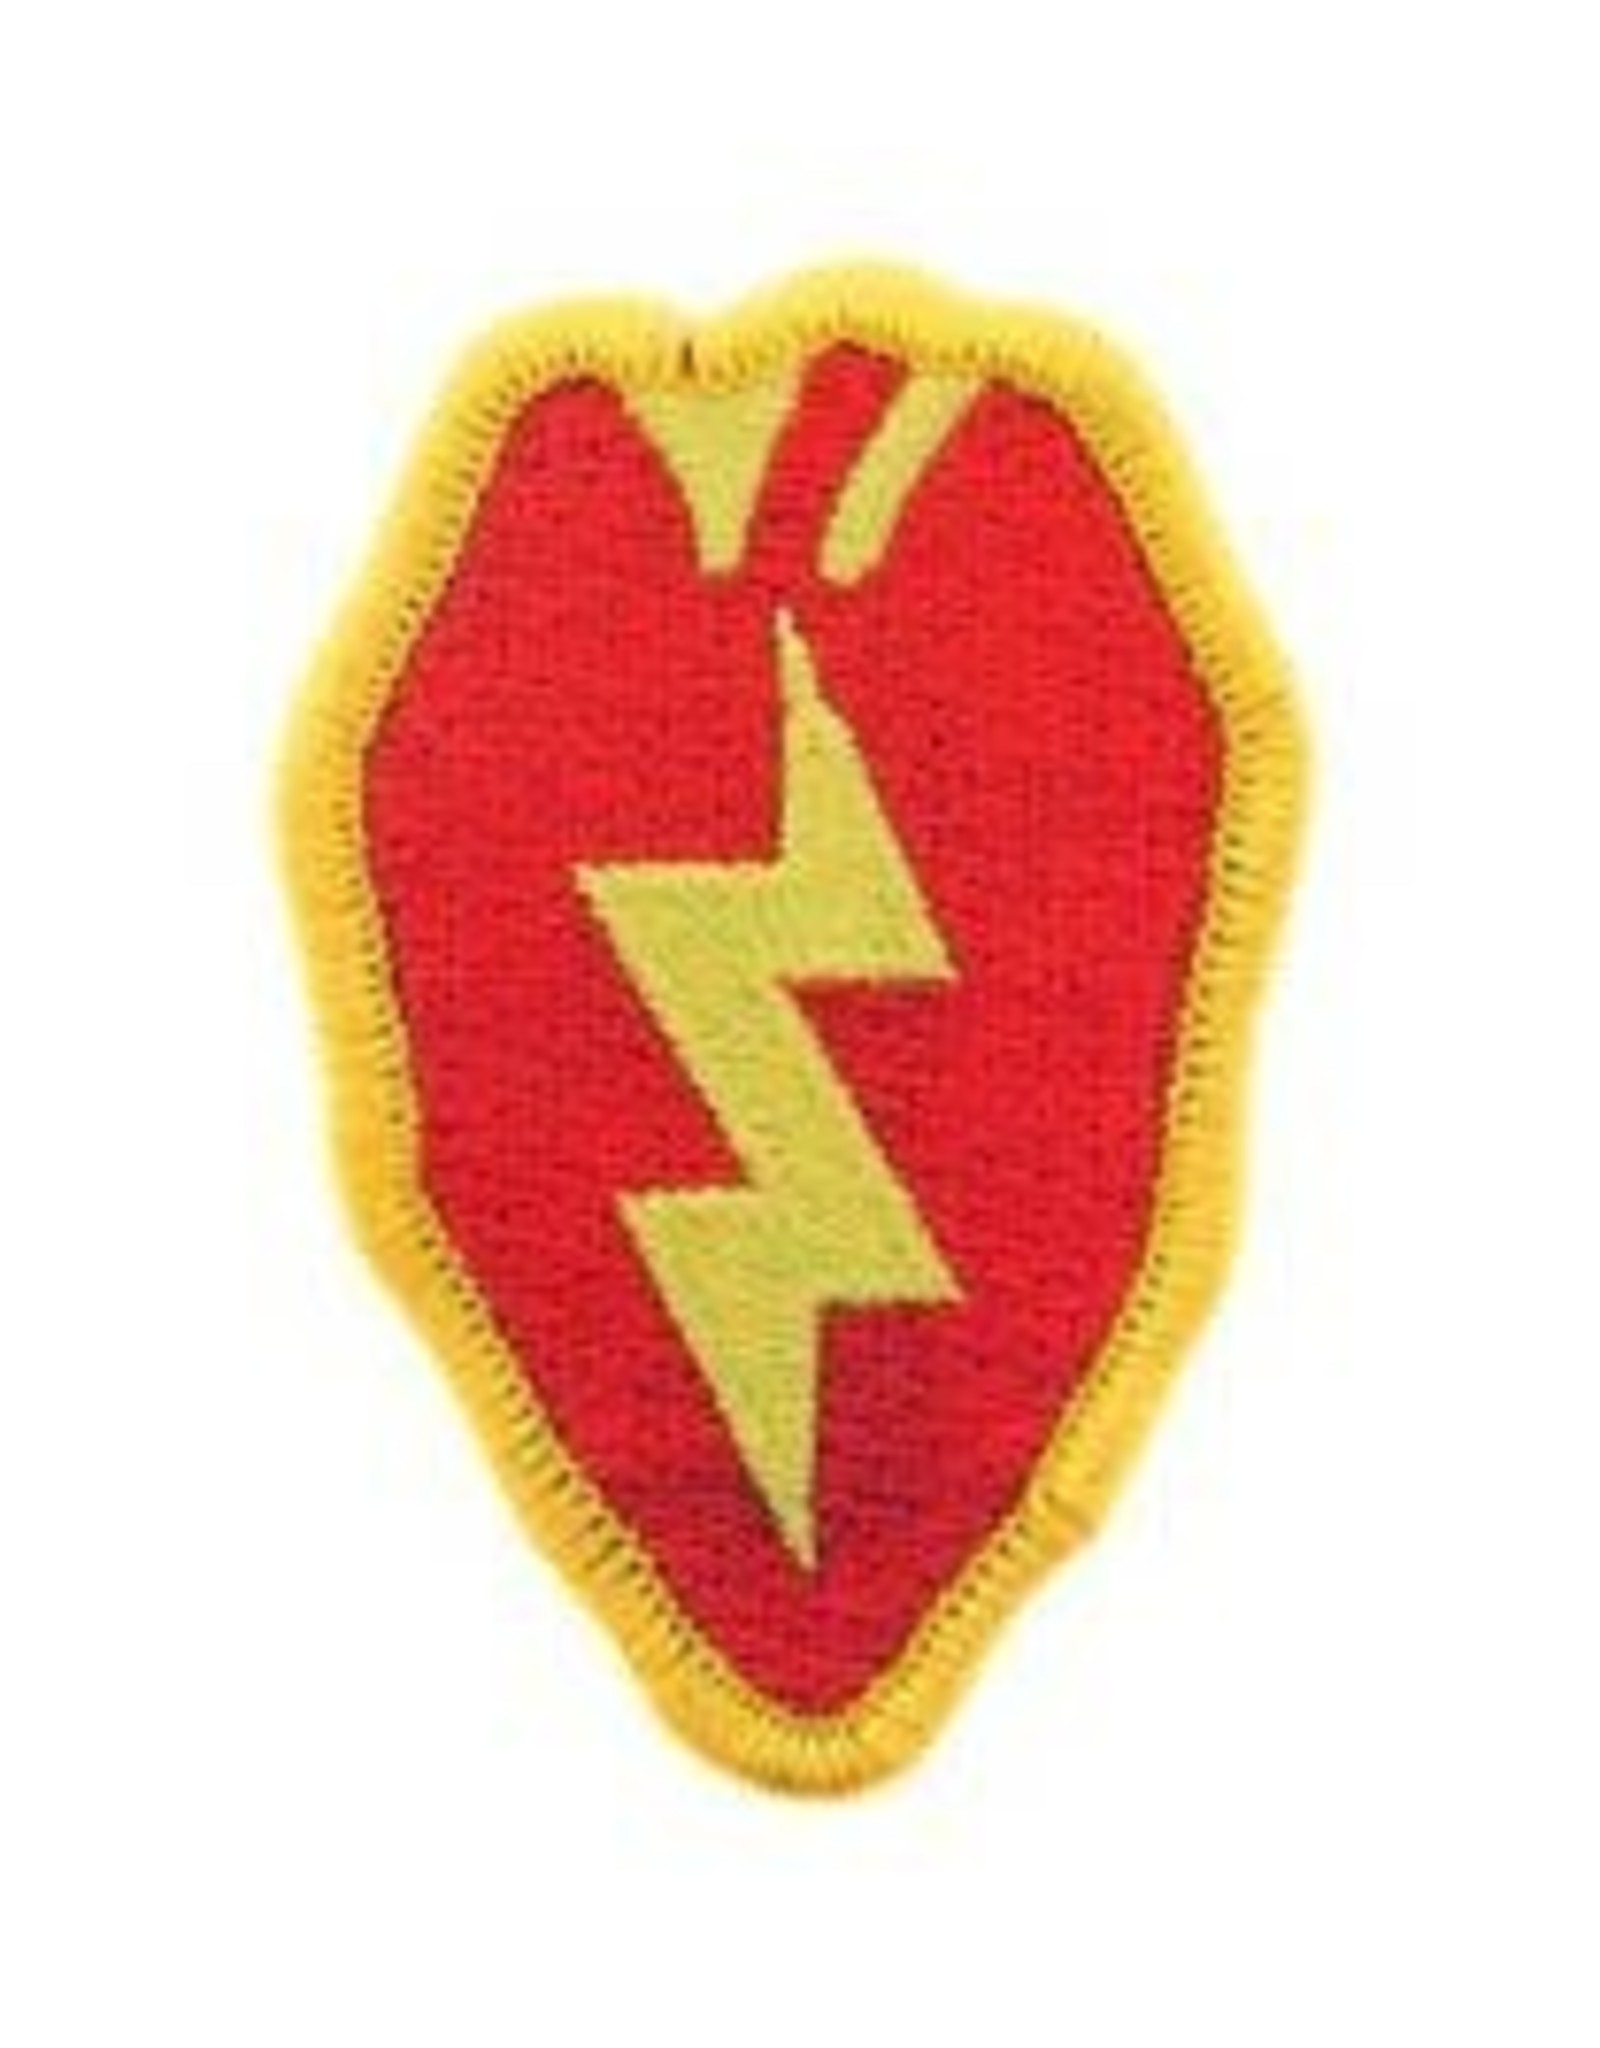 Patch - Army 25th Infantry Division